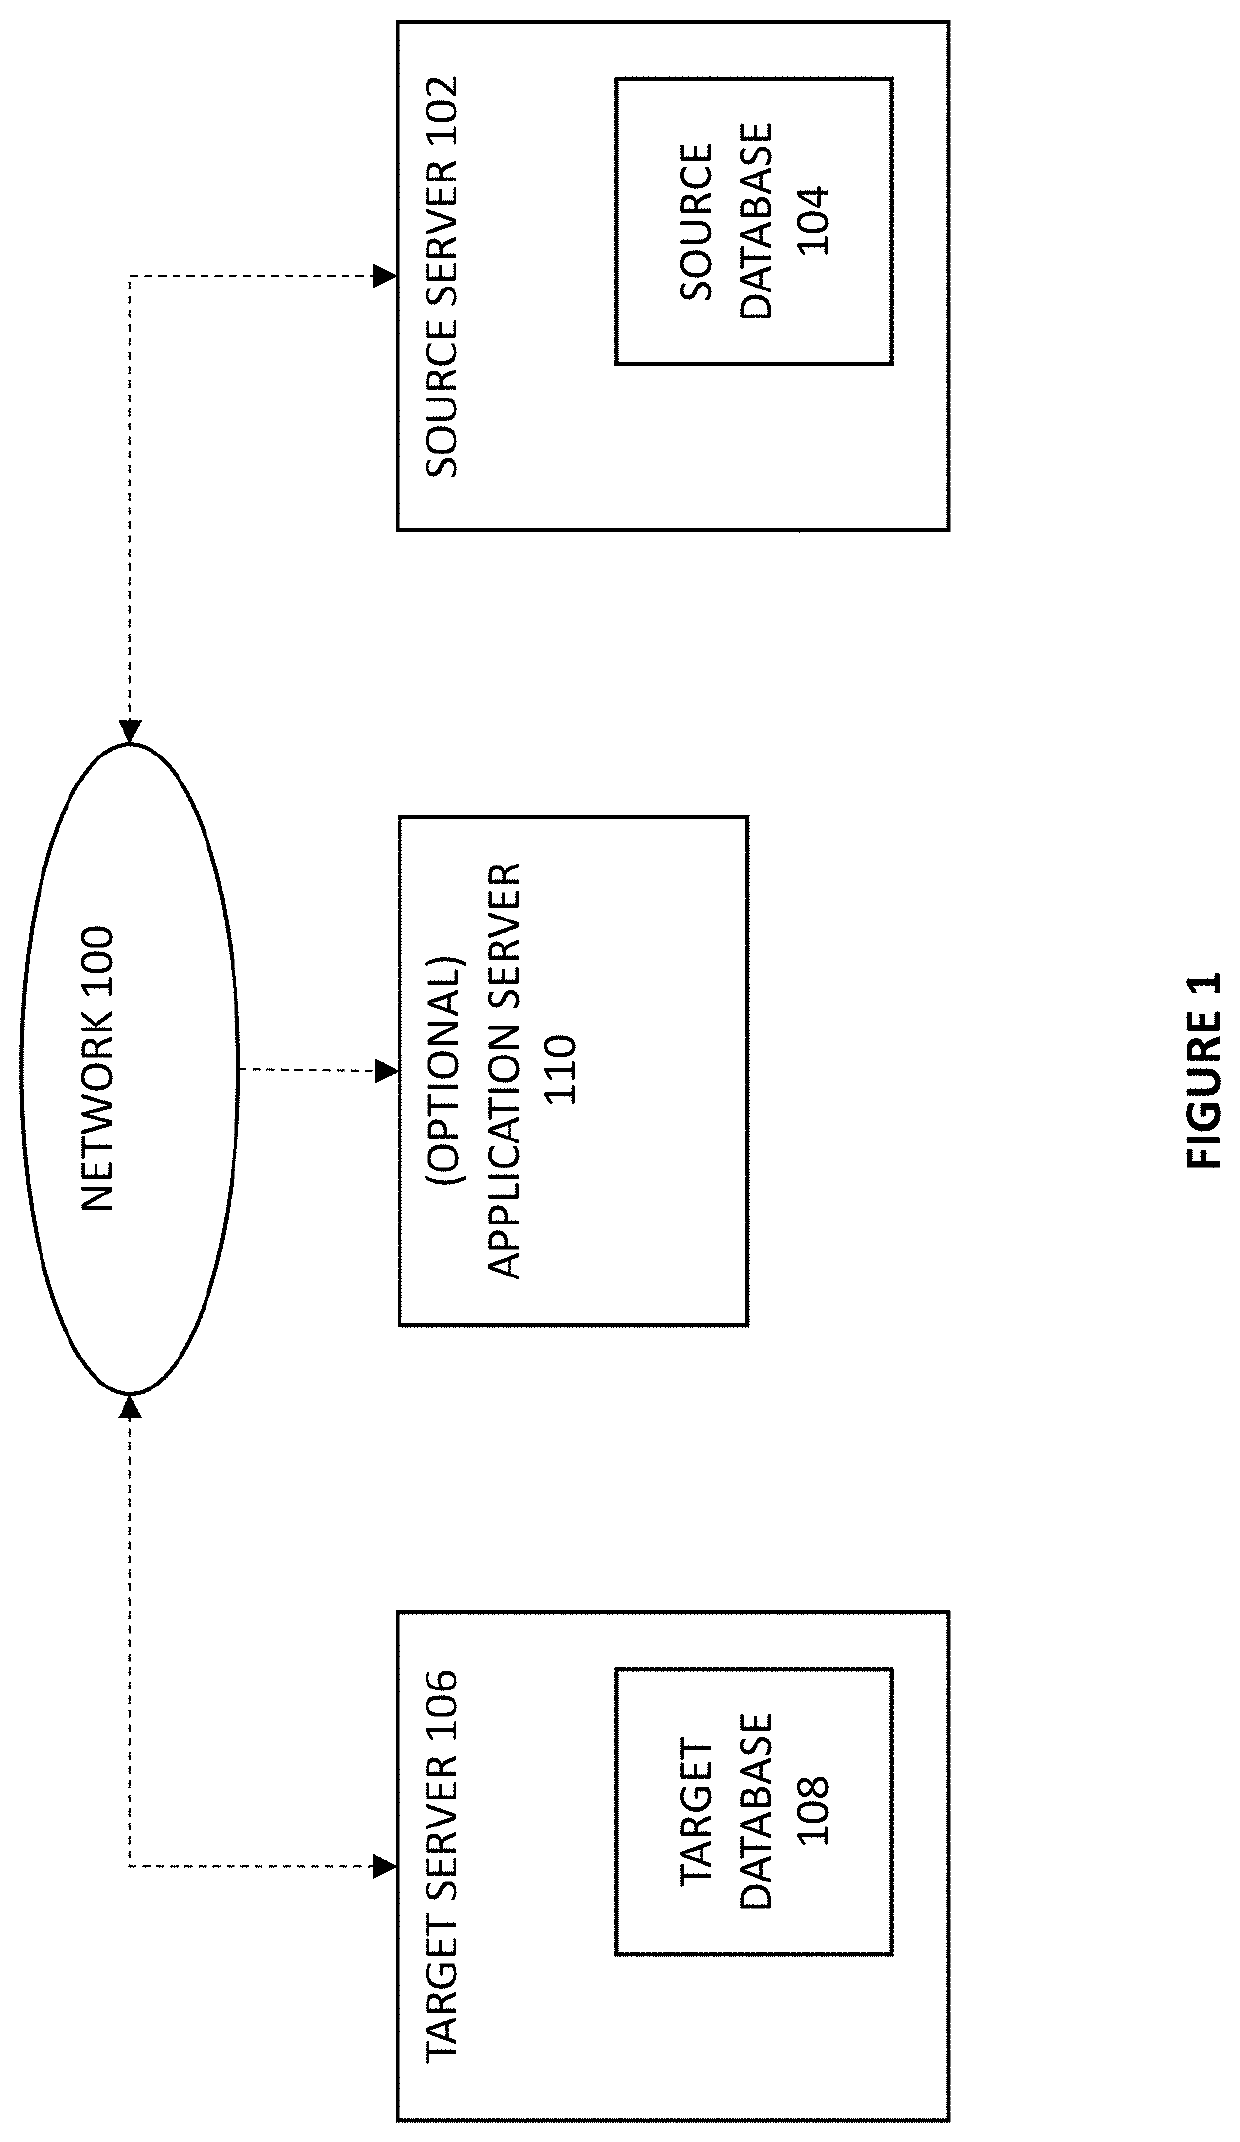 System and Method for Re-Synchronizing a Portion of or an Entire Source Database and a Target Database